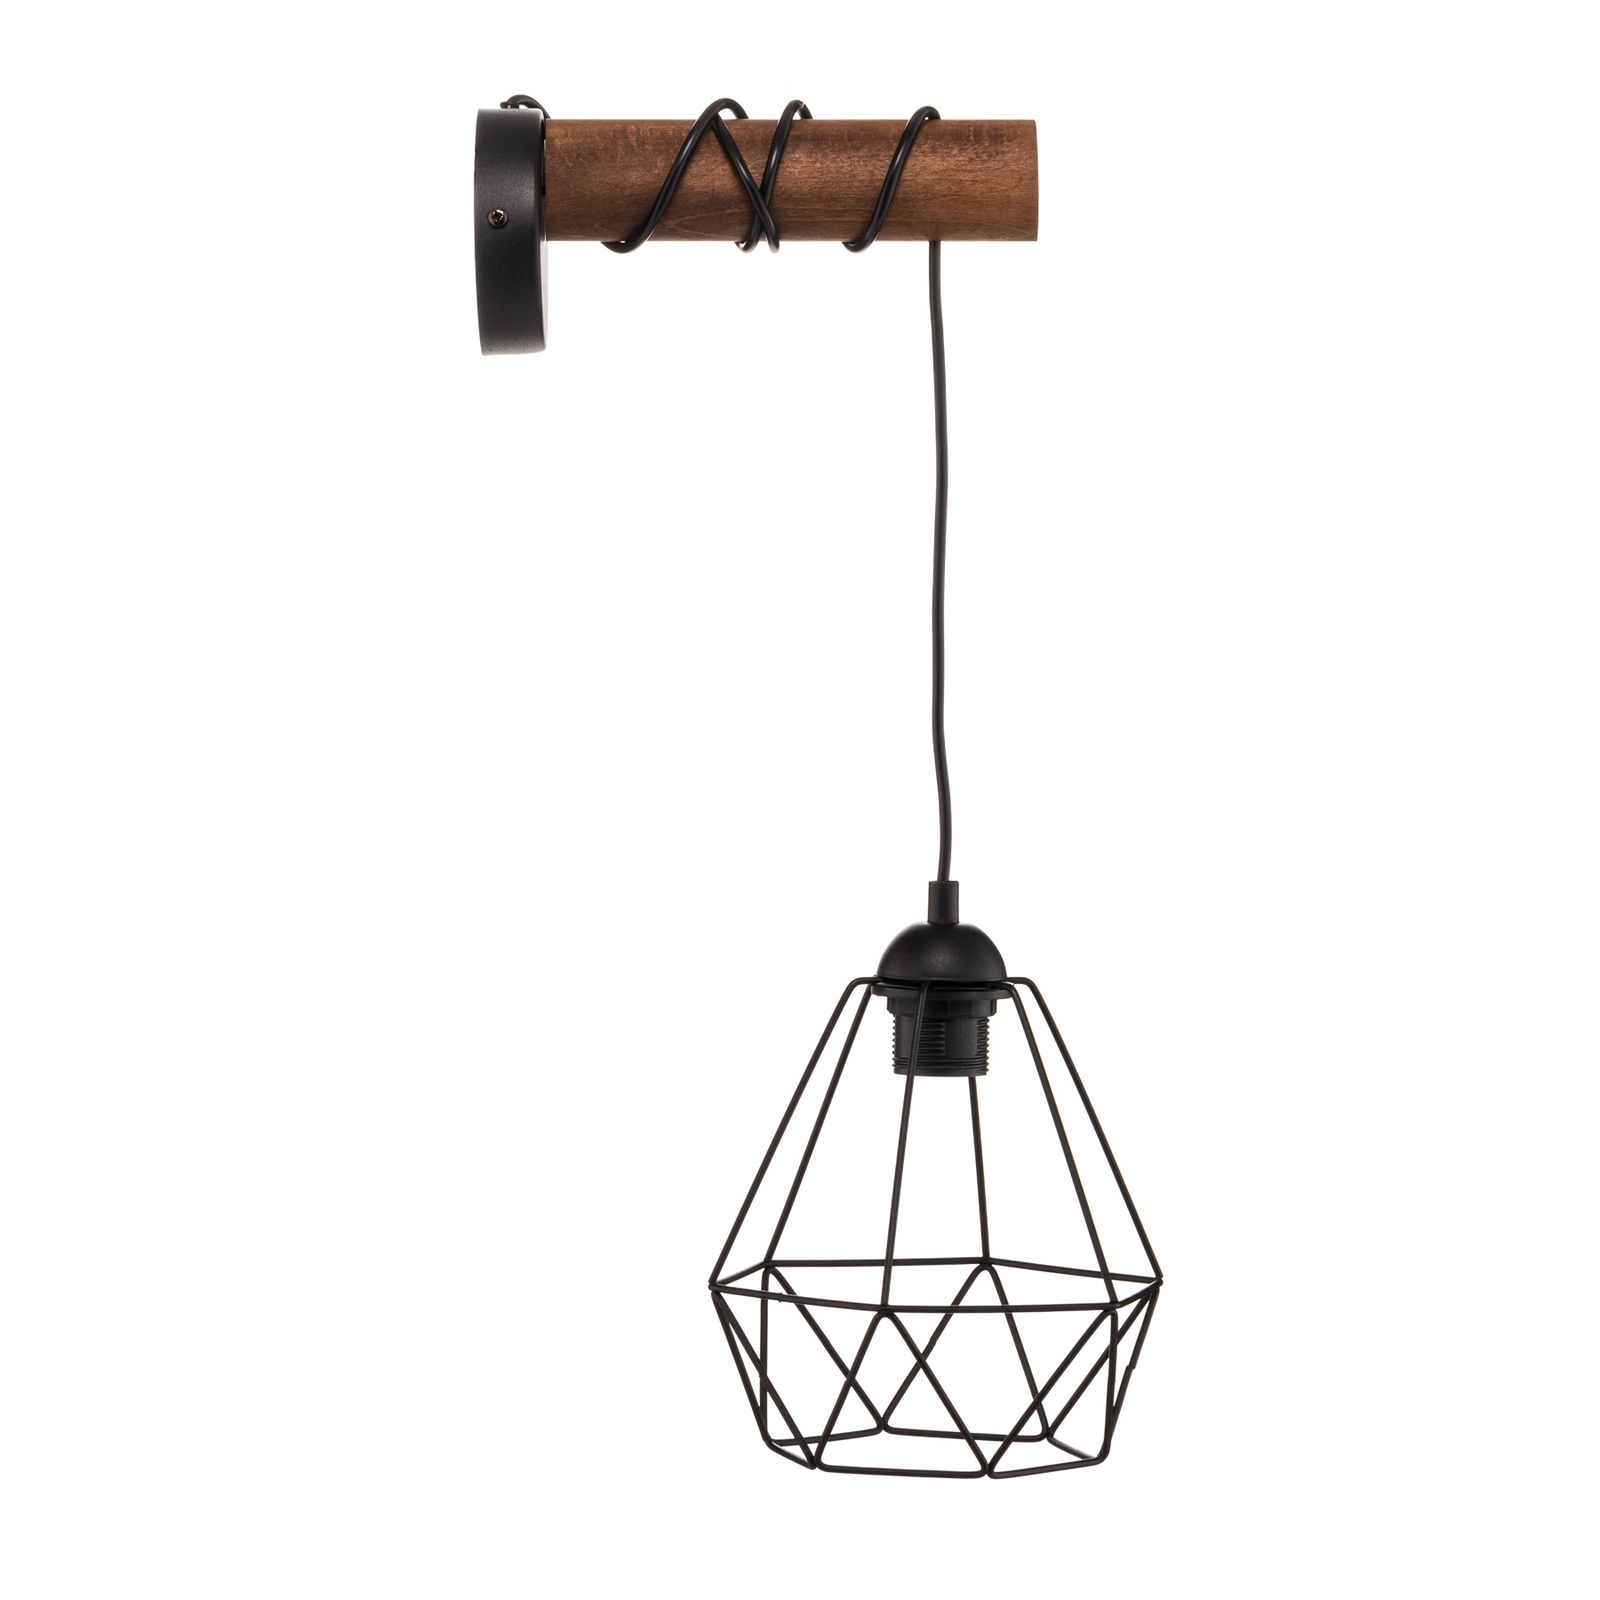 Acero wall light, cage lampshade